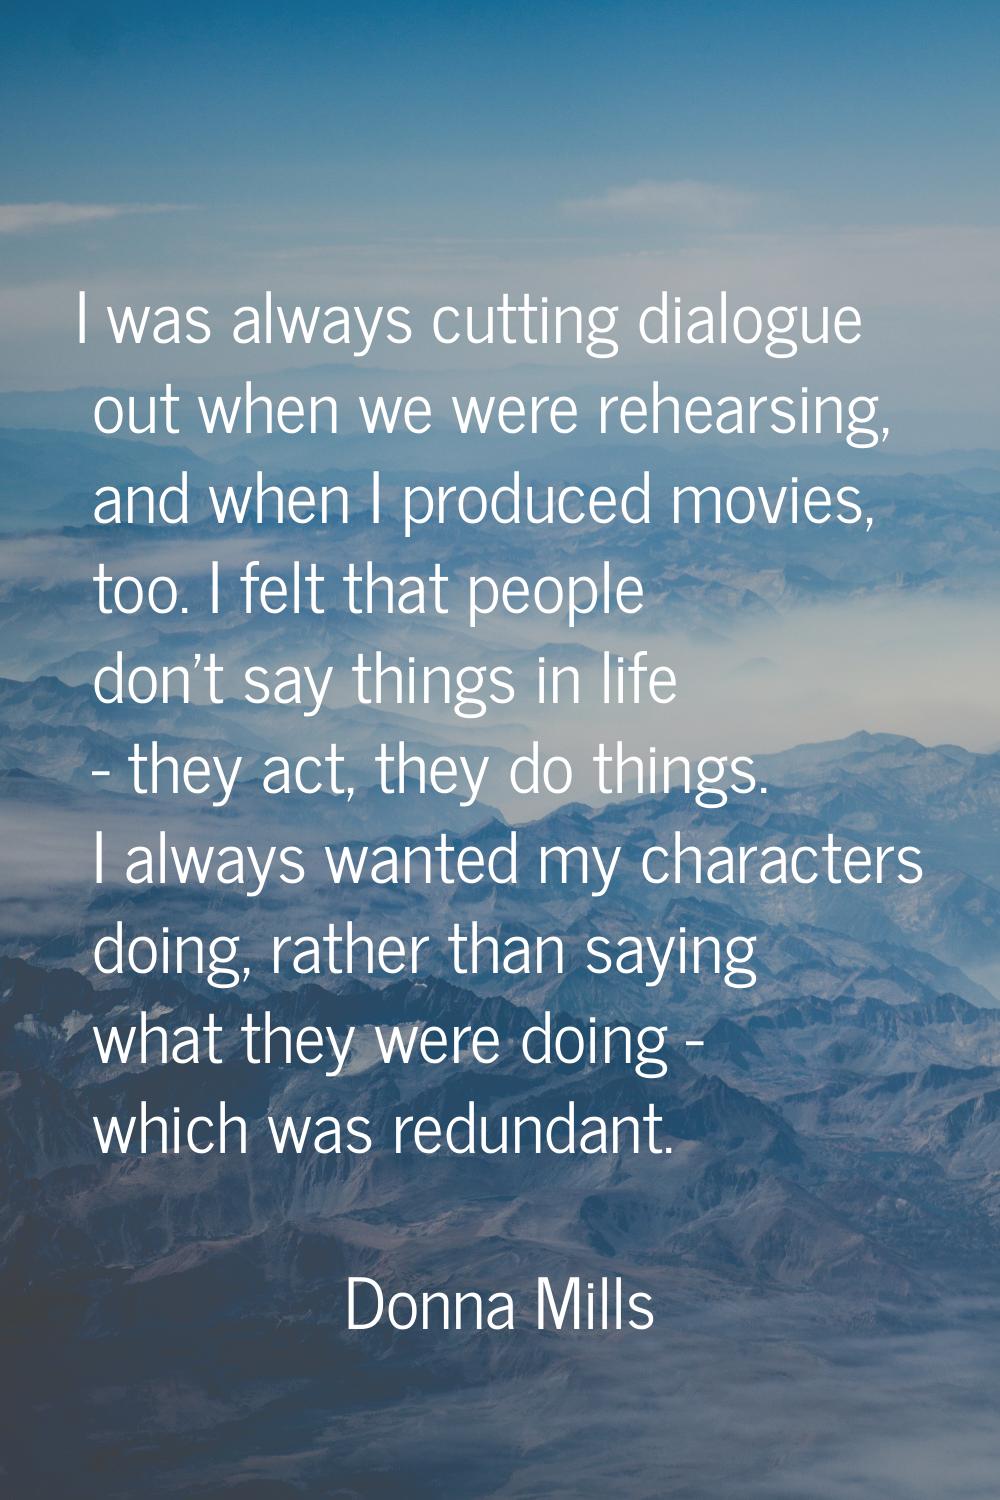 I was always cutting dialogue out when we were rehearsing, and when I produced movies, too. I felt 